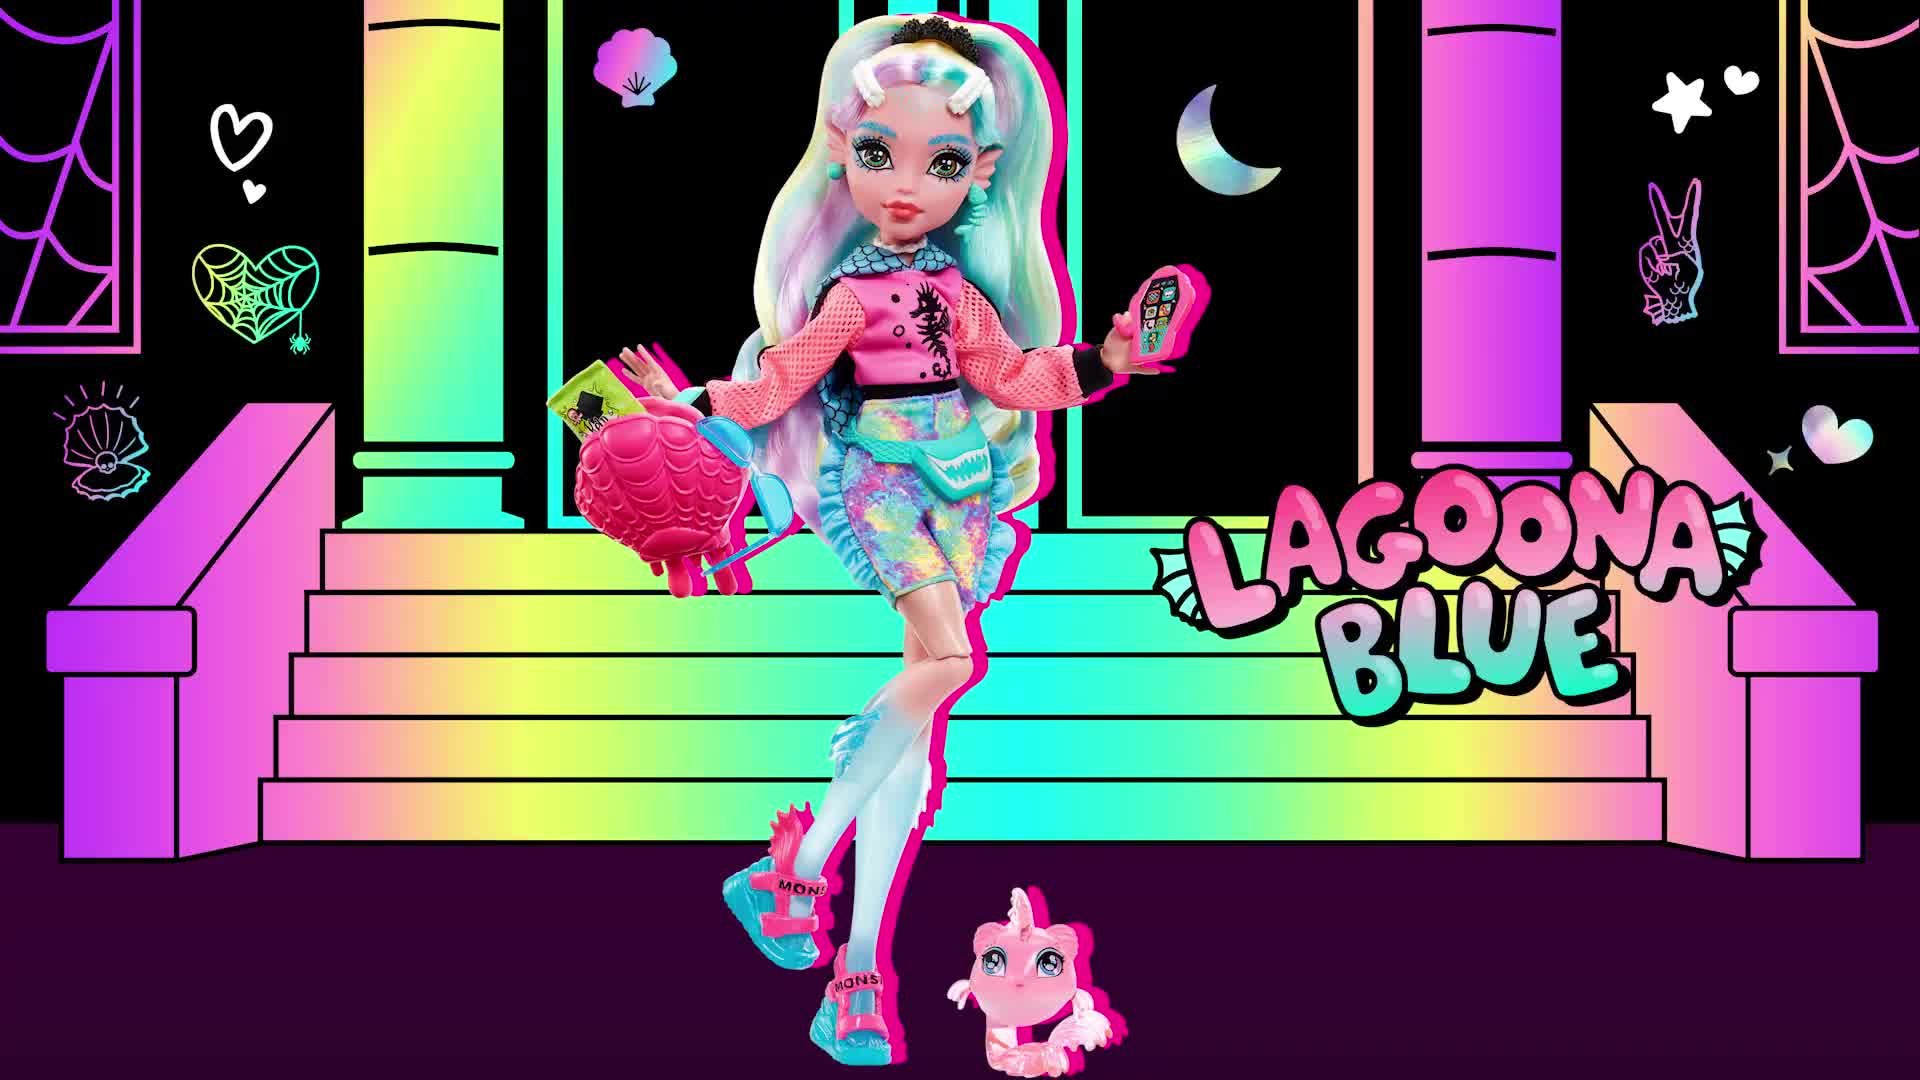 Buy Monster High Lagoona Blue Doll and Accessories